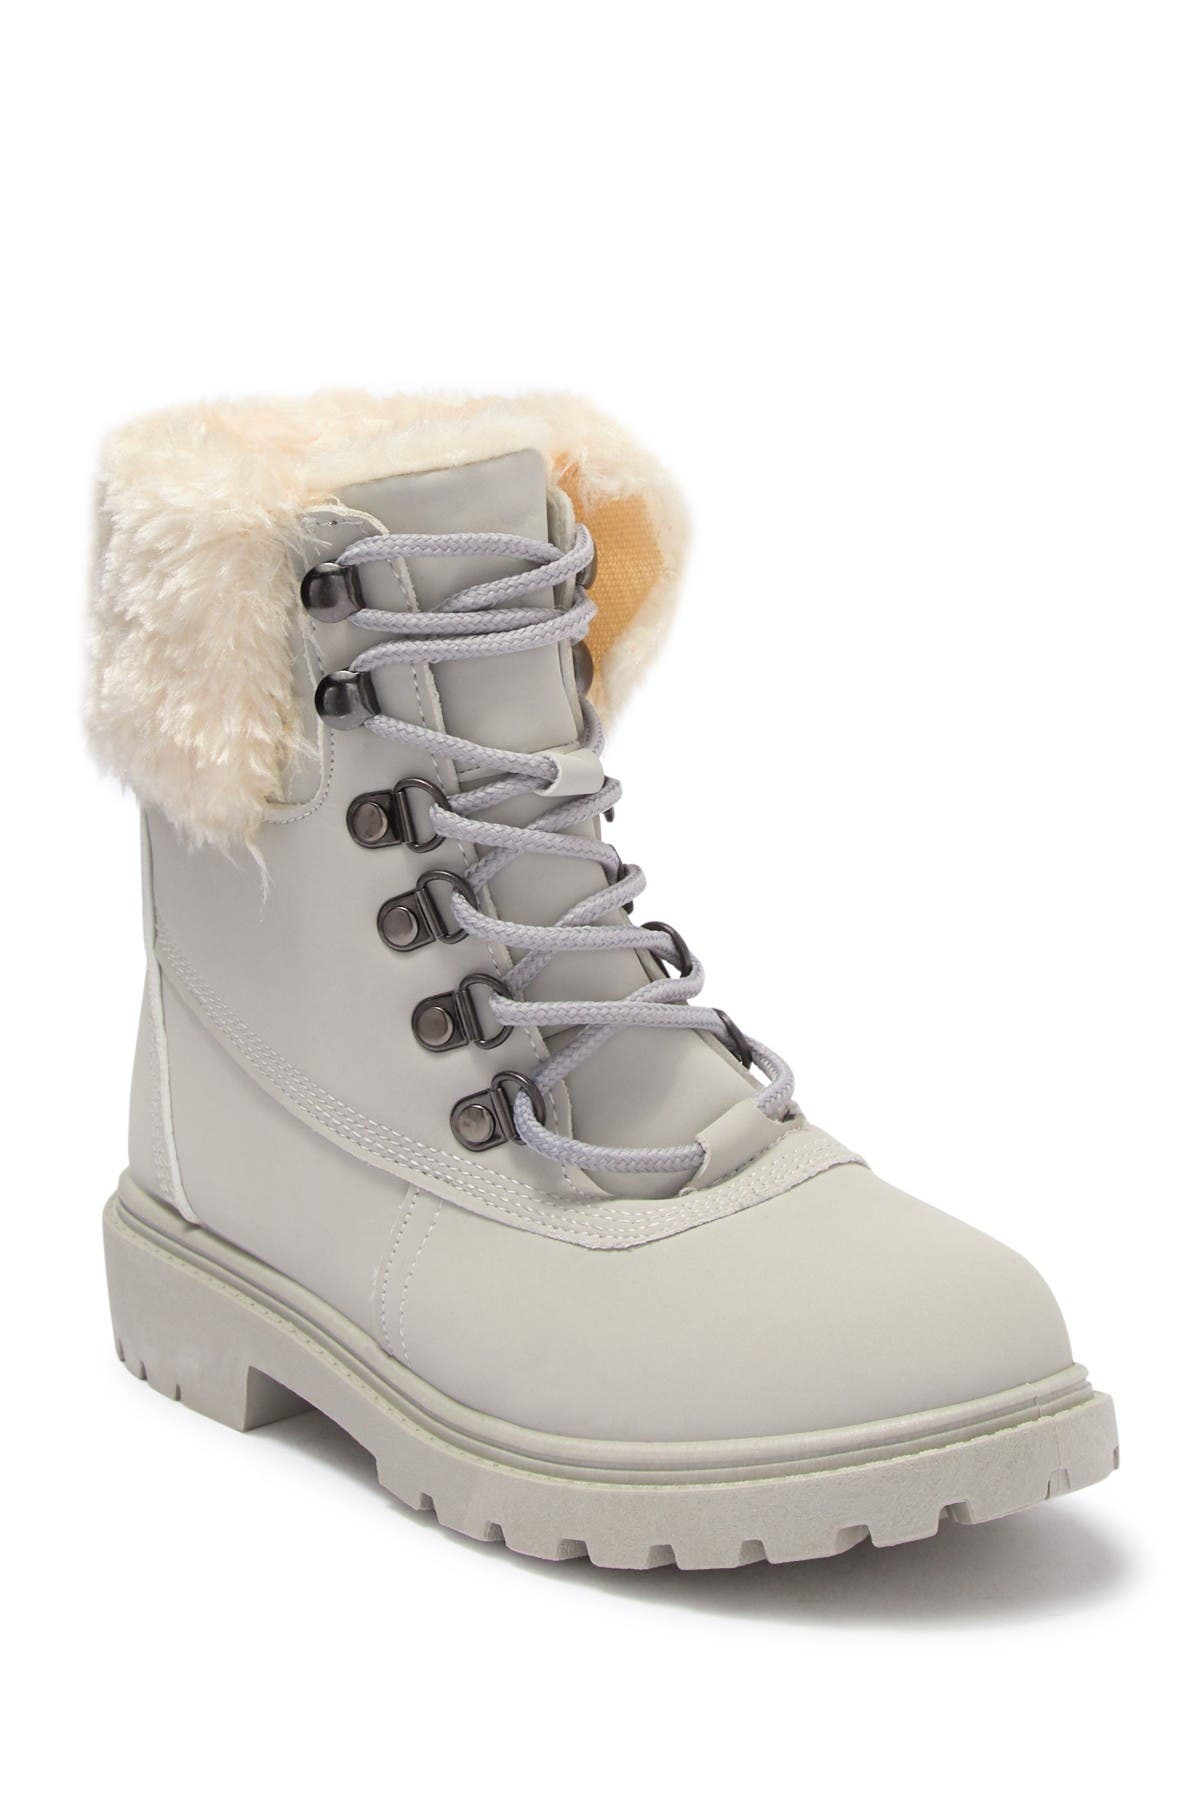 OLIVIA MILLER | Faux Fur Lace Up Boot 